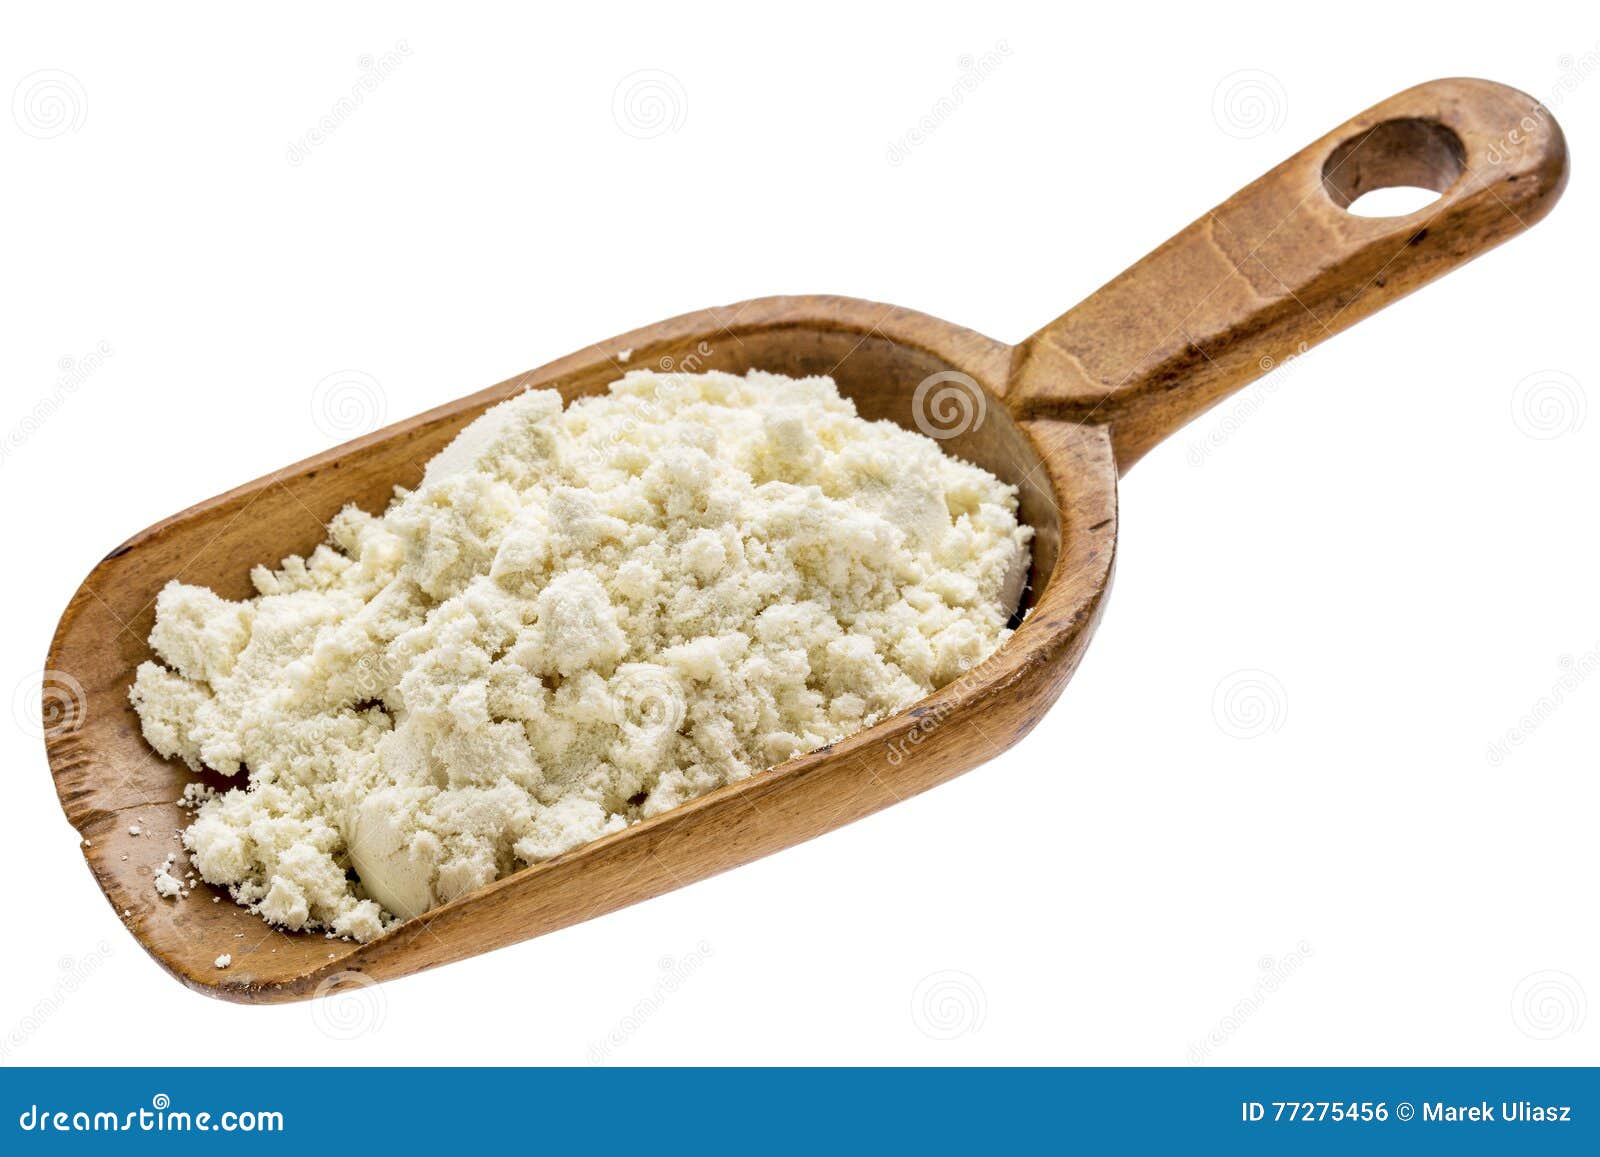 https://thumbs.dreamstime.com/z/whey-protein-powder-rustic-wooden-scoop-isolated-white-77275456.jpg